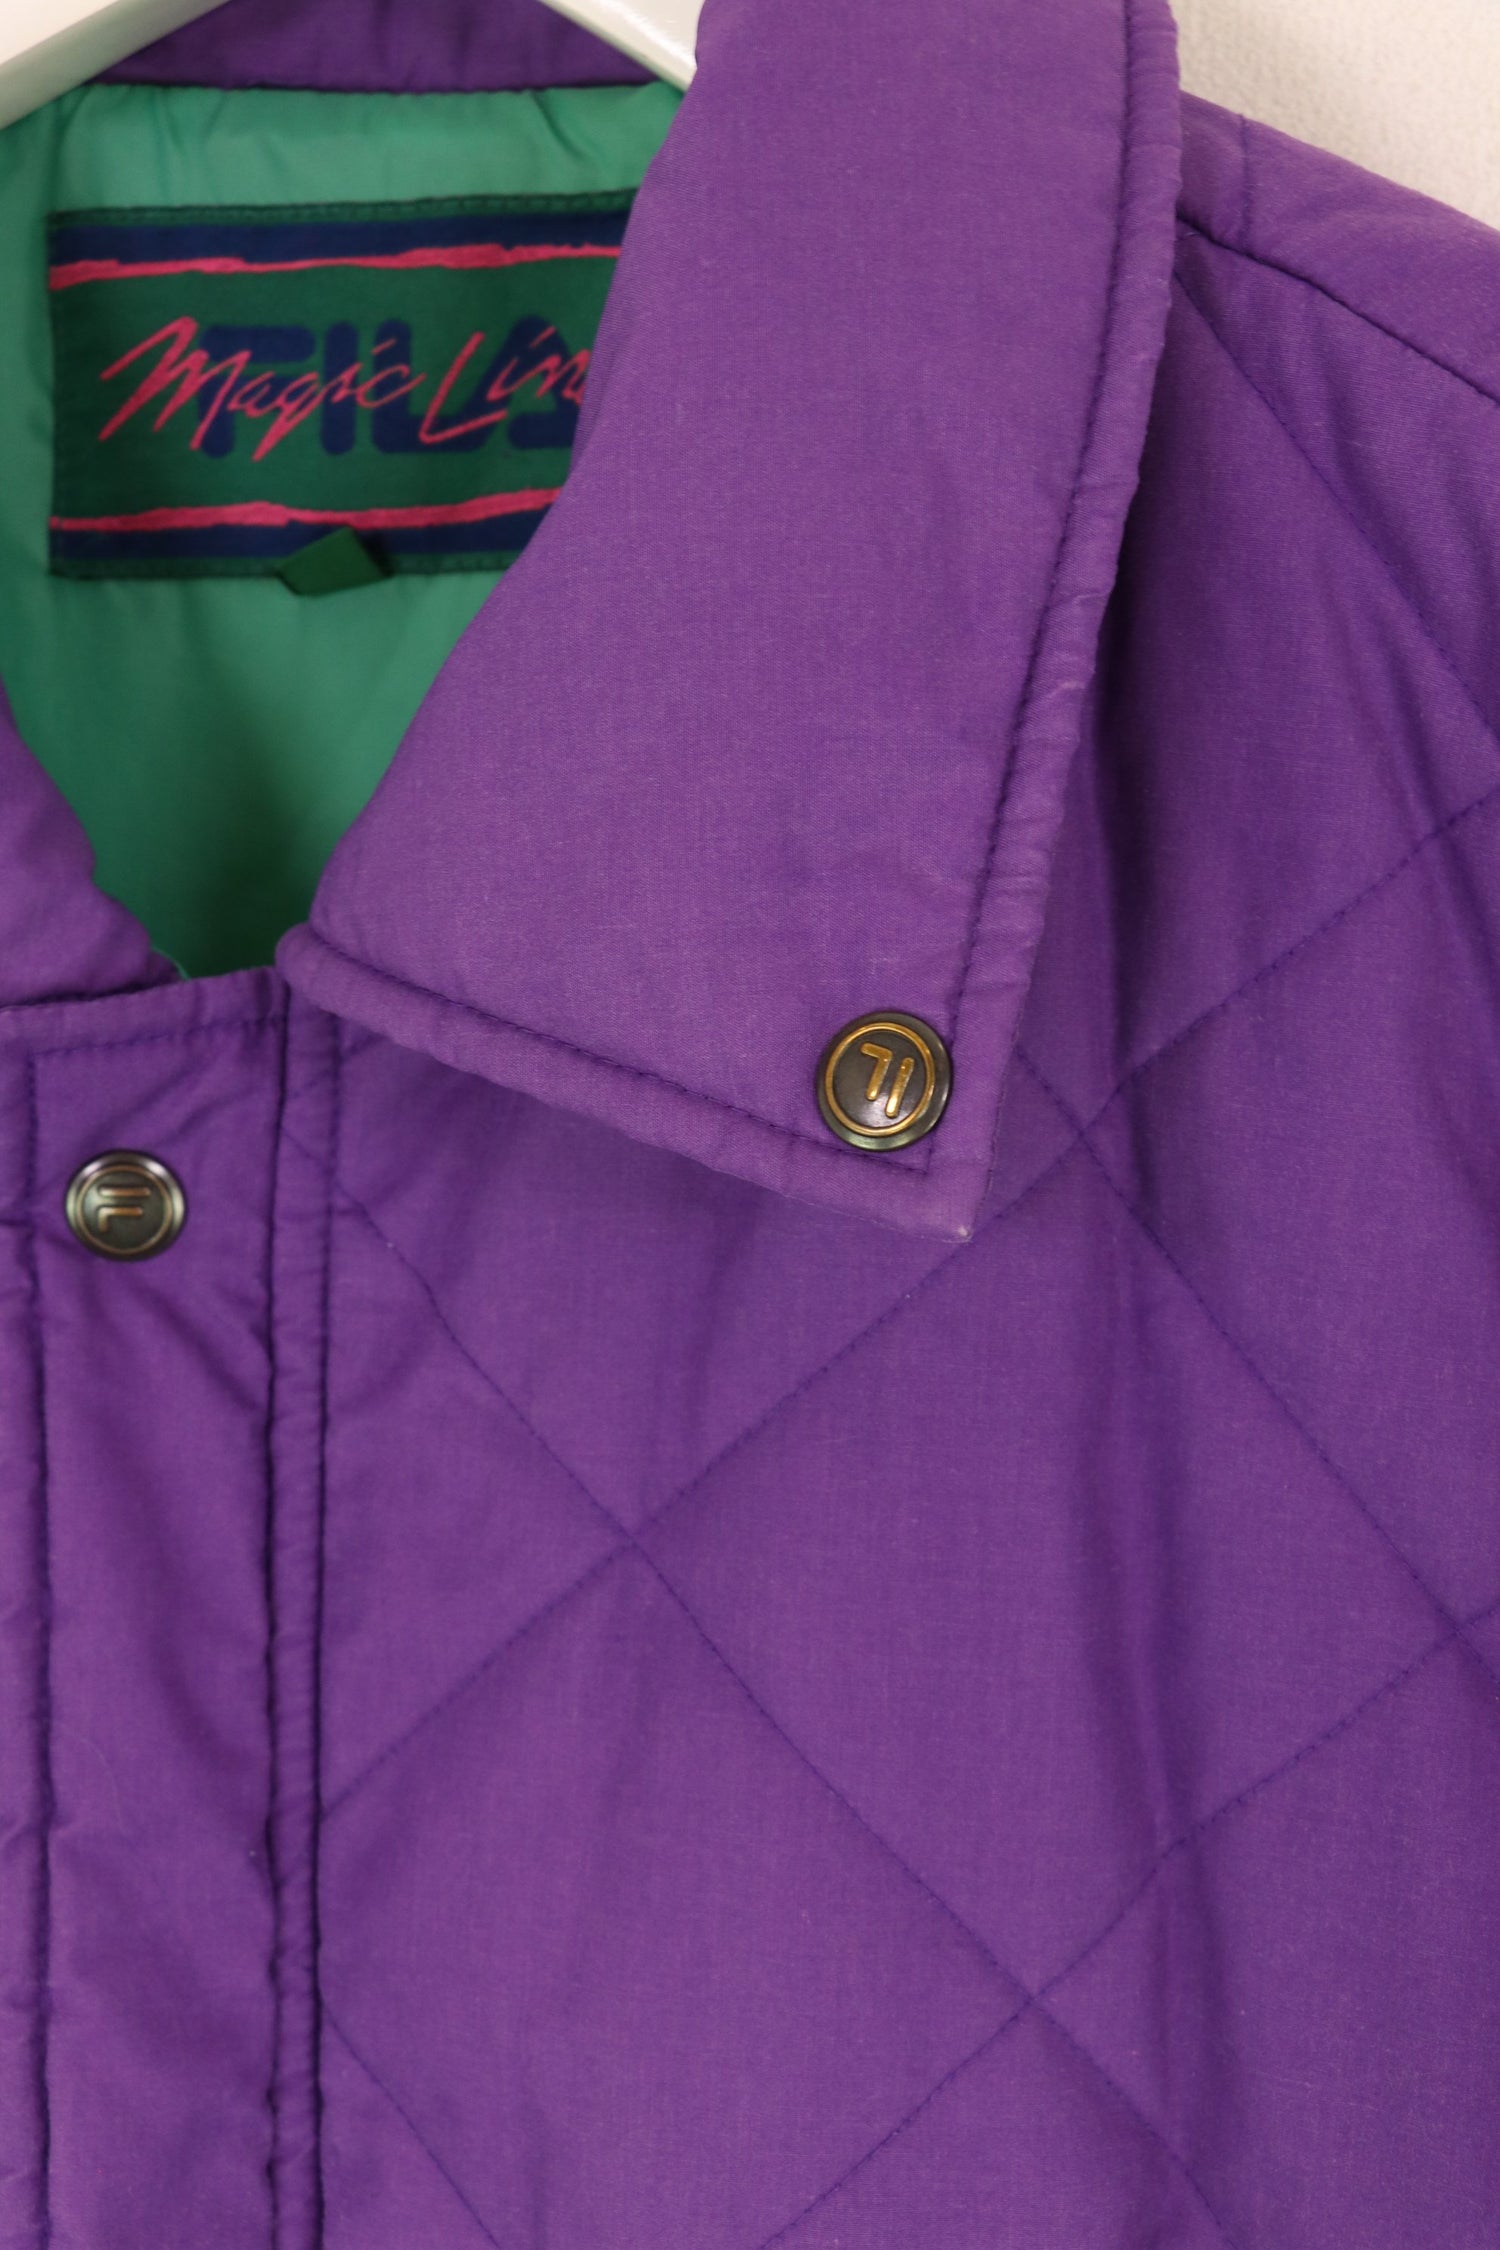 Fila Magic Line Quilted Jacket Purple Large